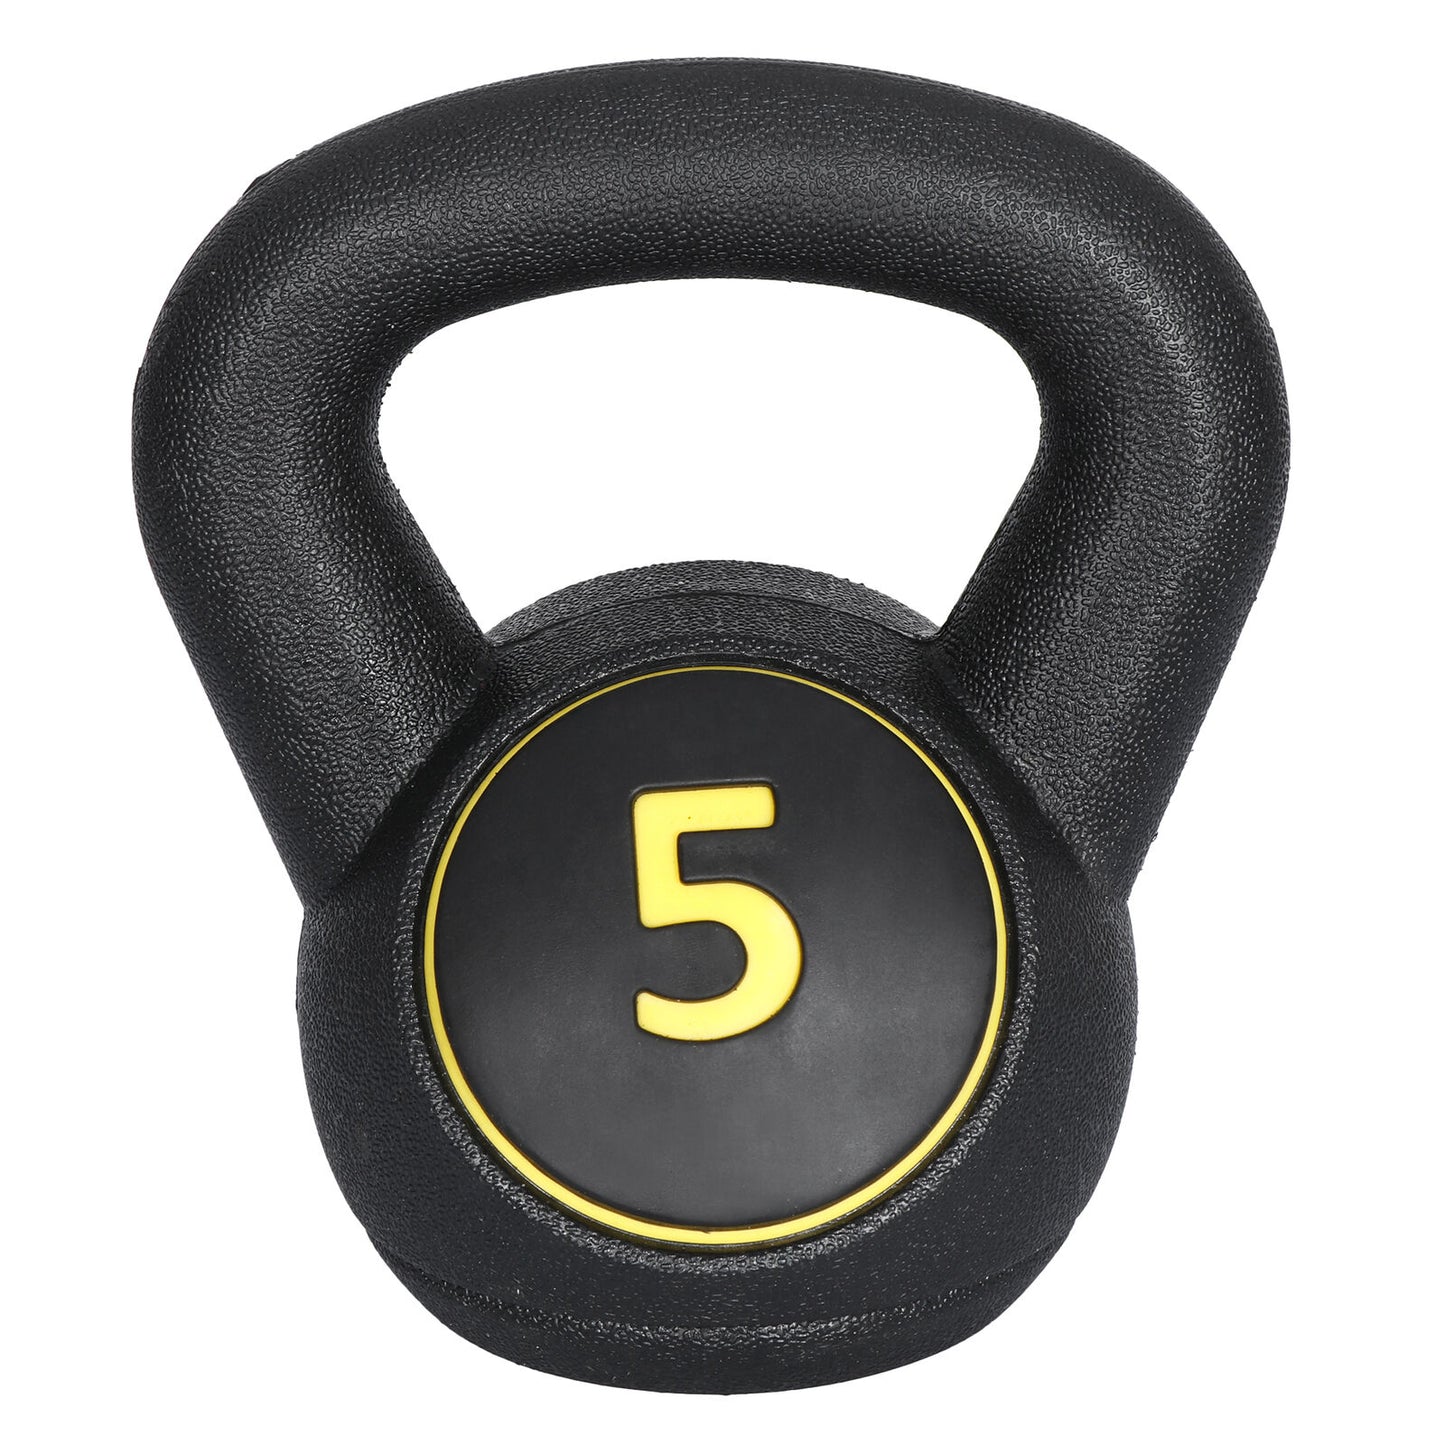 Pro 3-Piece Kettlebell Set Fitness Strength Training Exercise With Base Rack